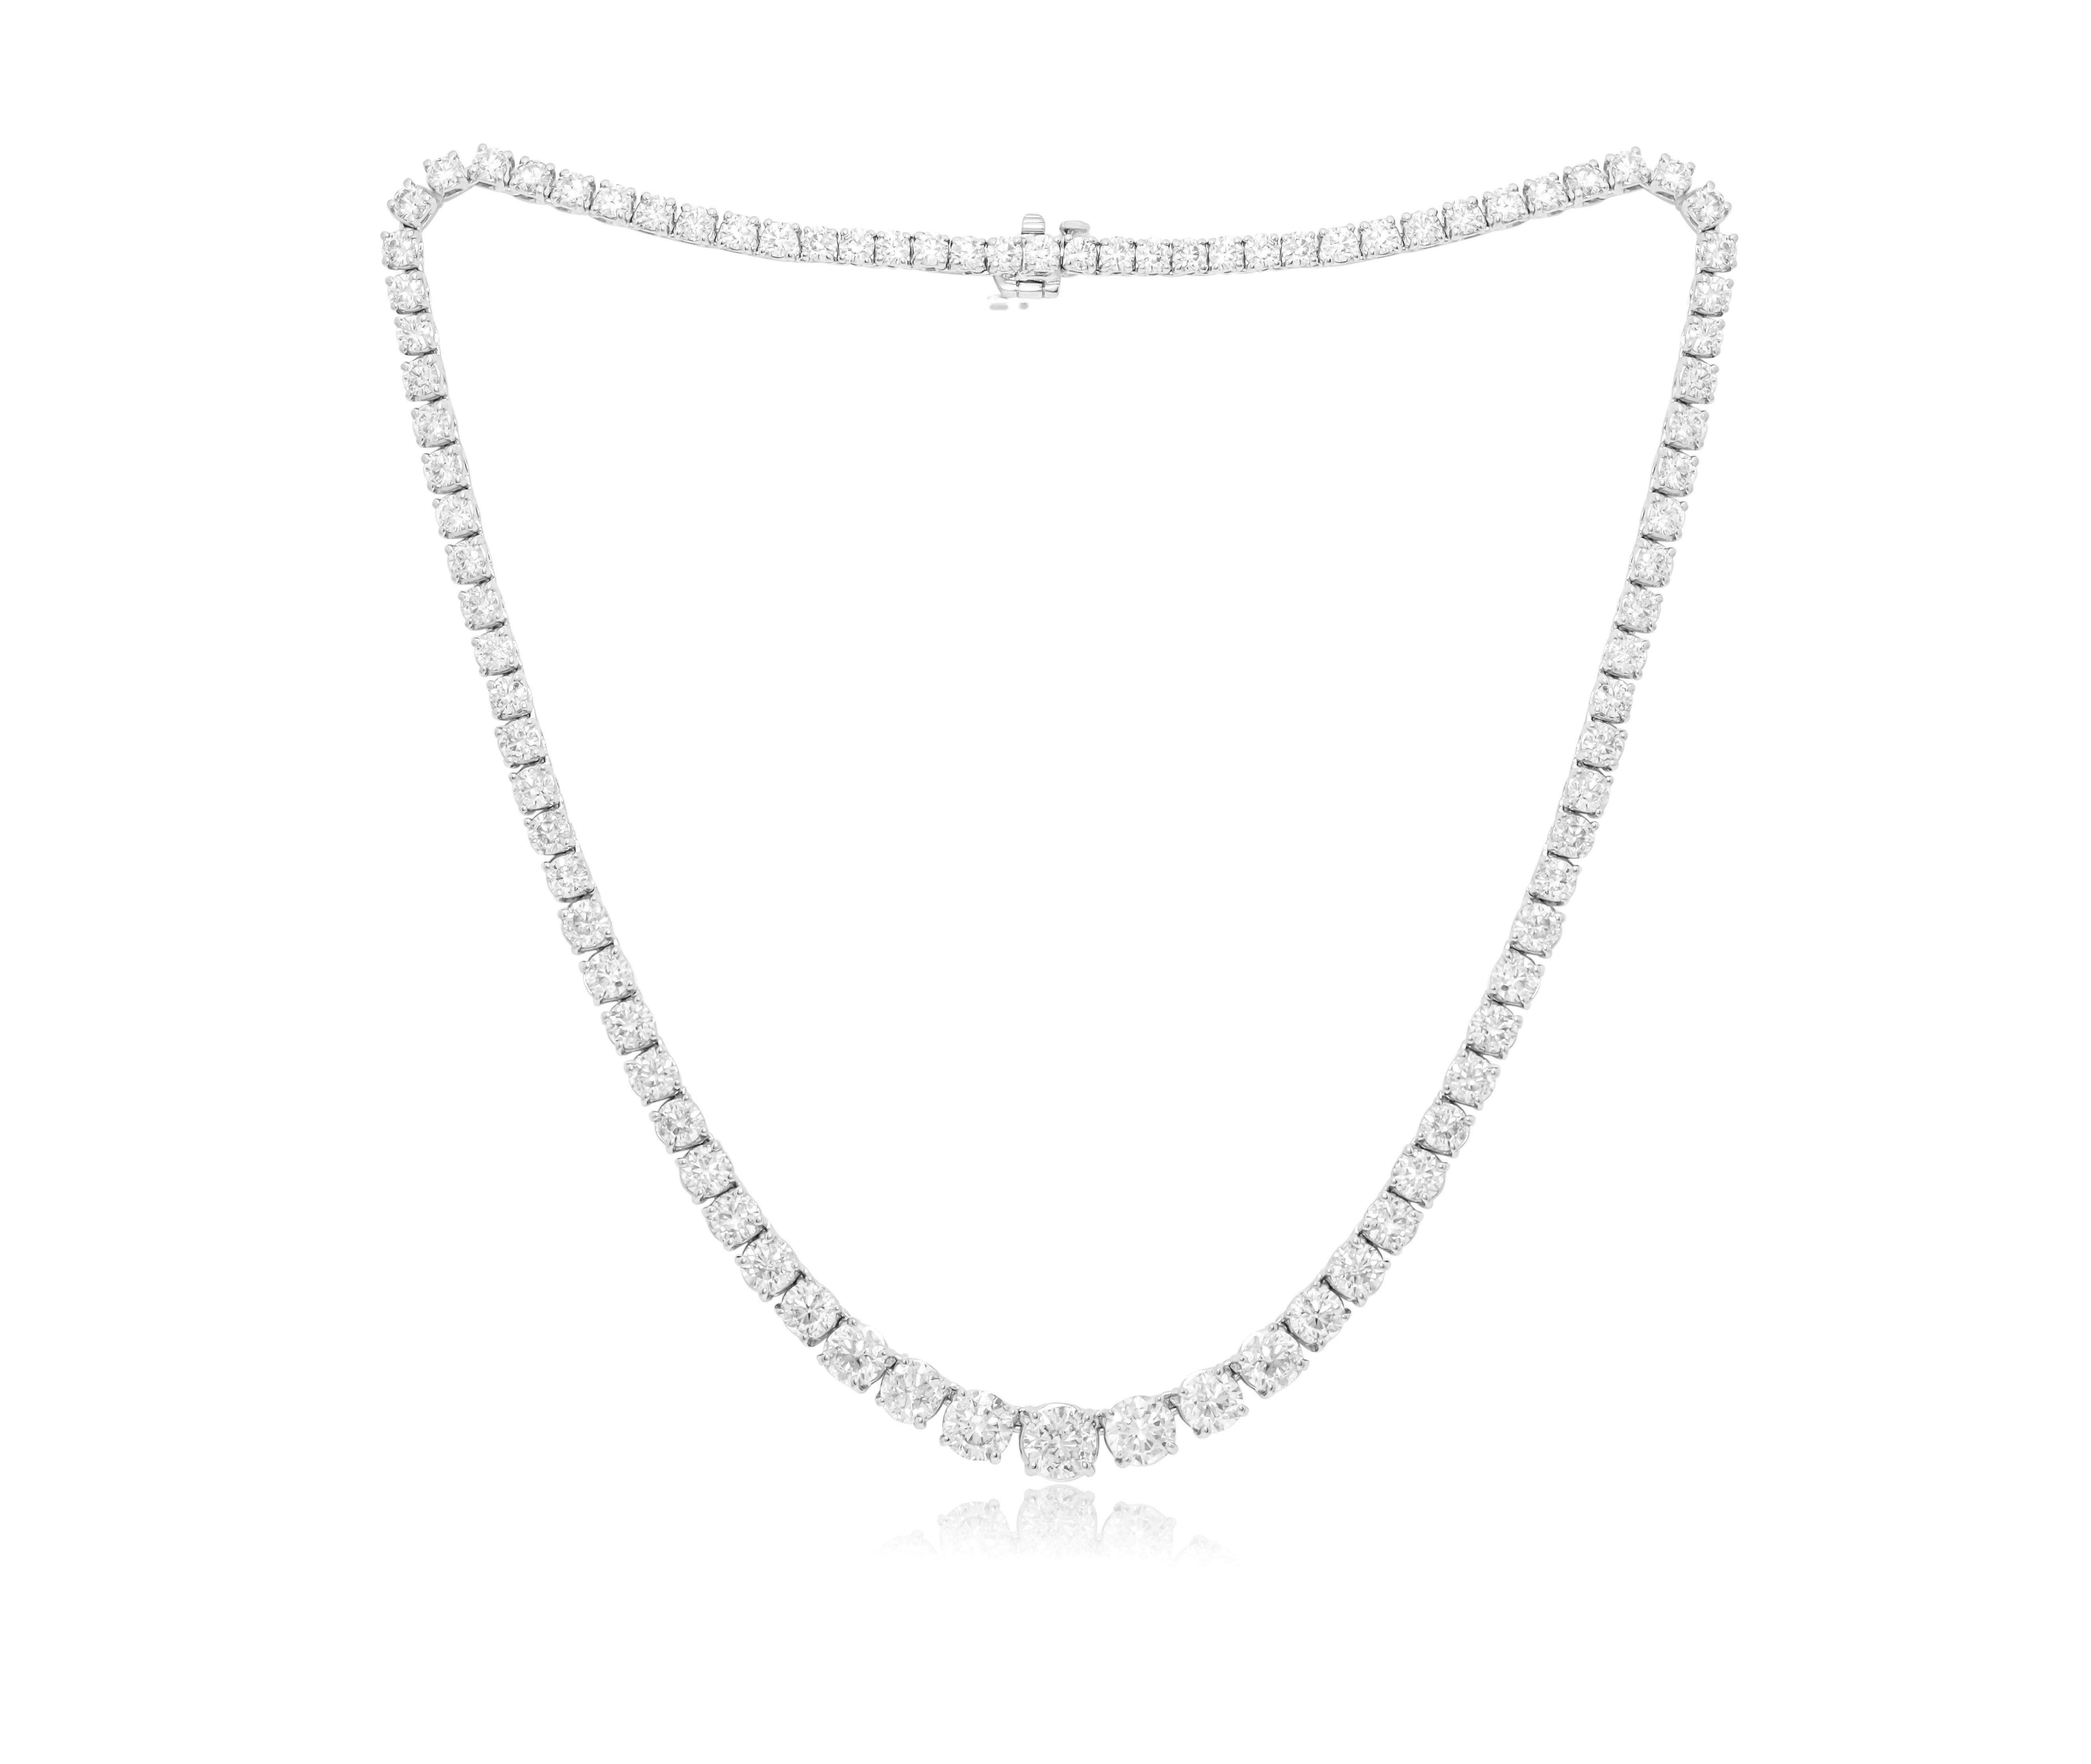 Custom 14k white gold graduated tennis necklace  17.60 cts  round brilliant diamonds 107 stones 0.16 each set in a 4 prong setting FG color SI clarity. Excellent  cut. 